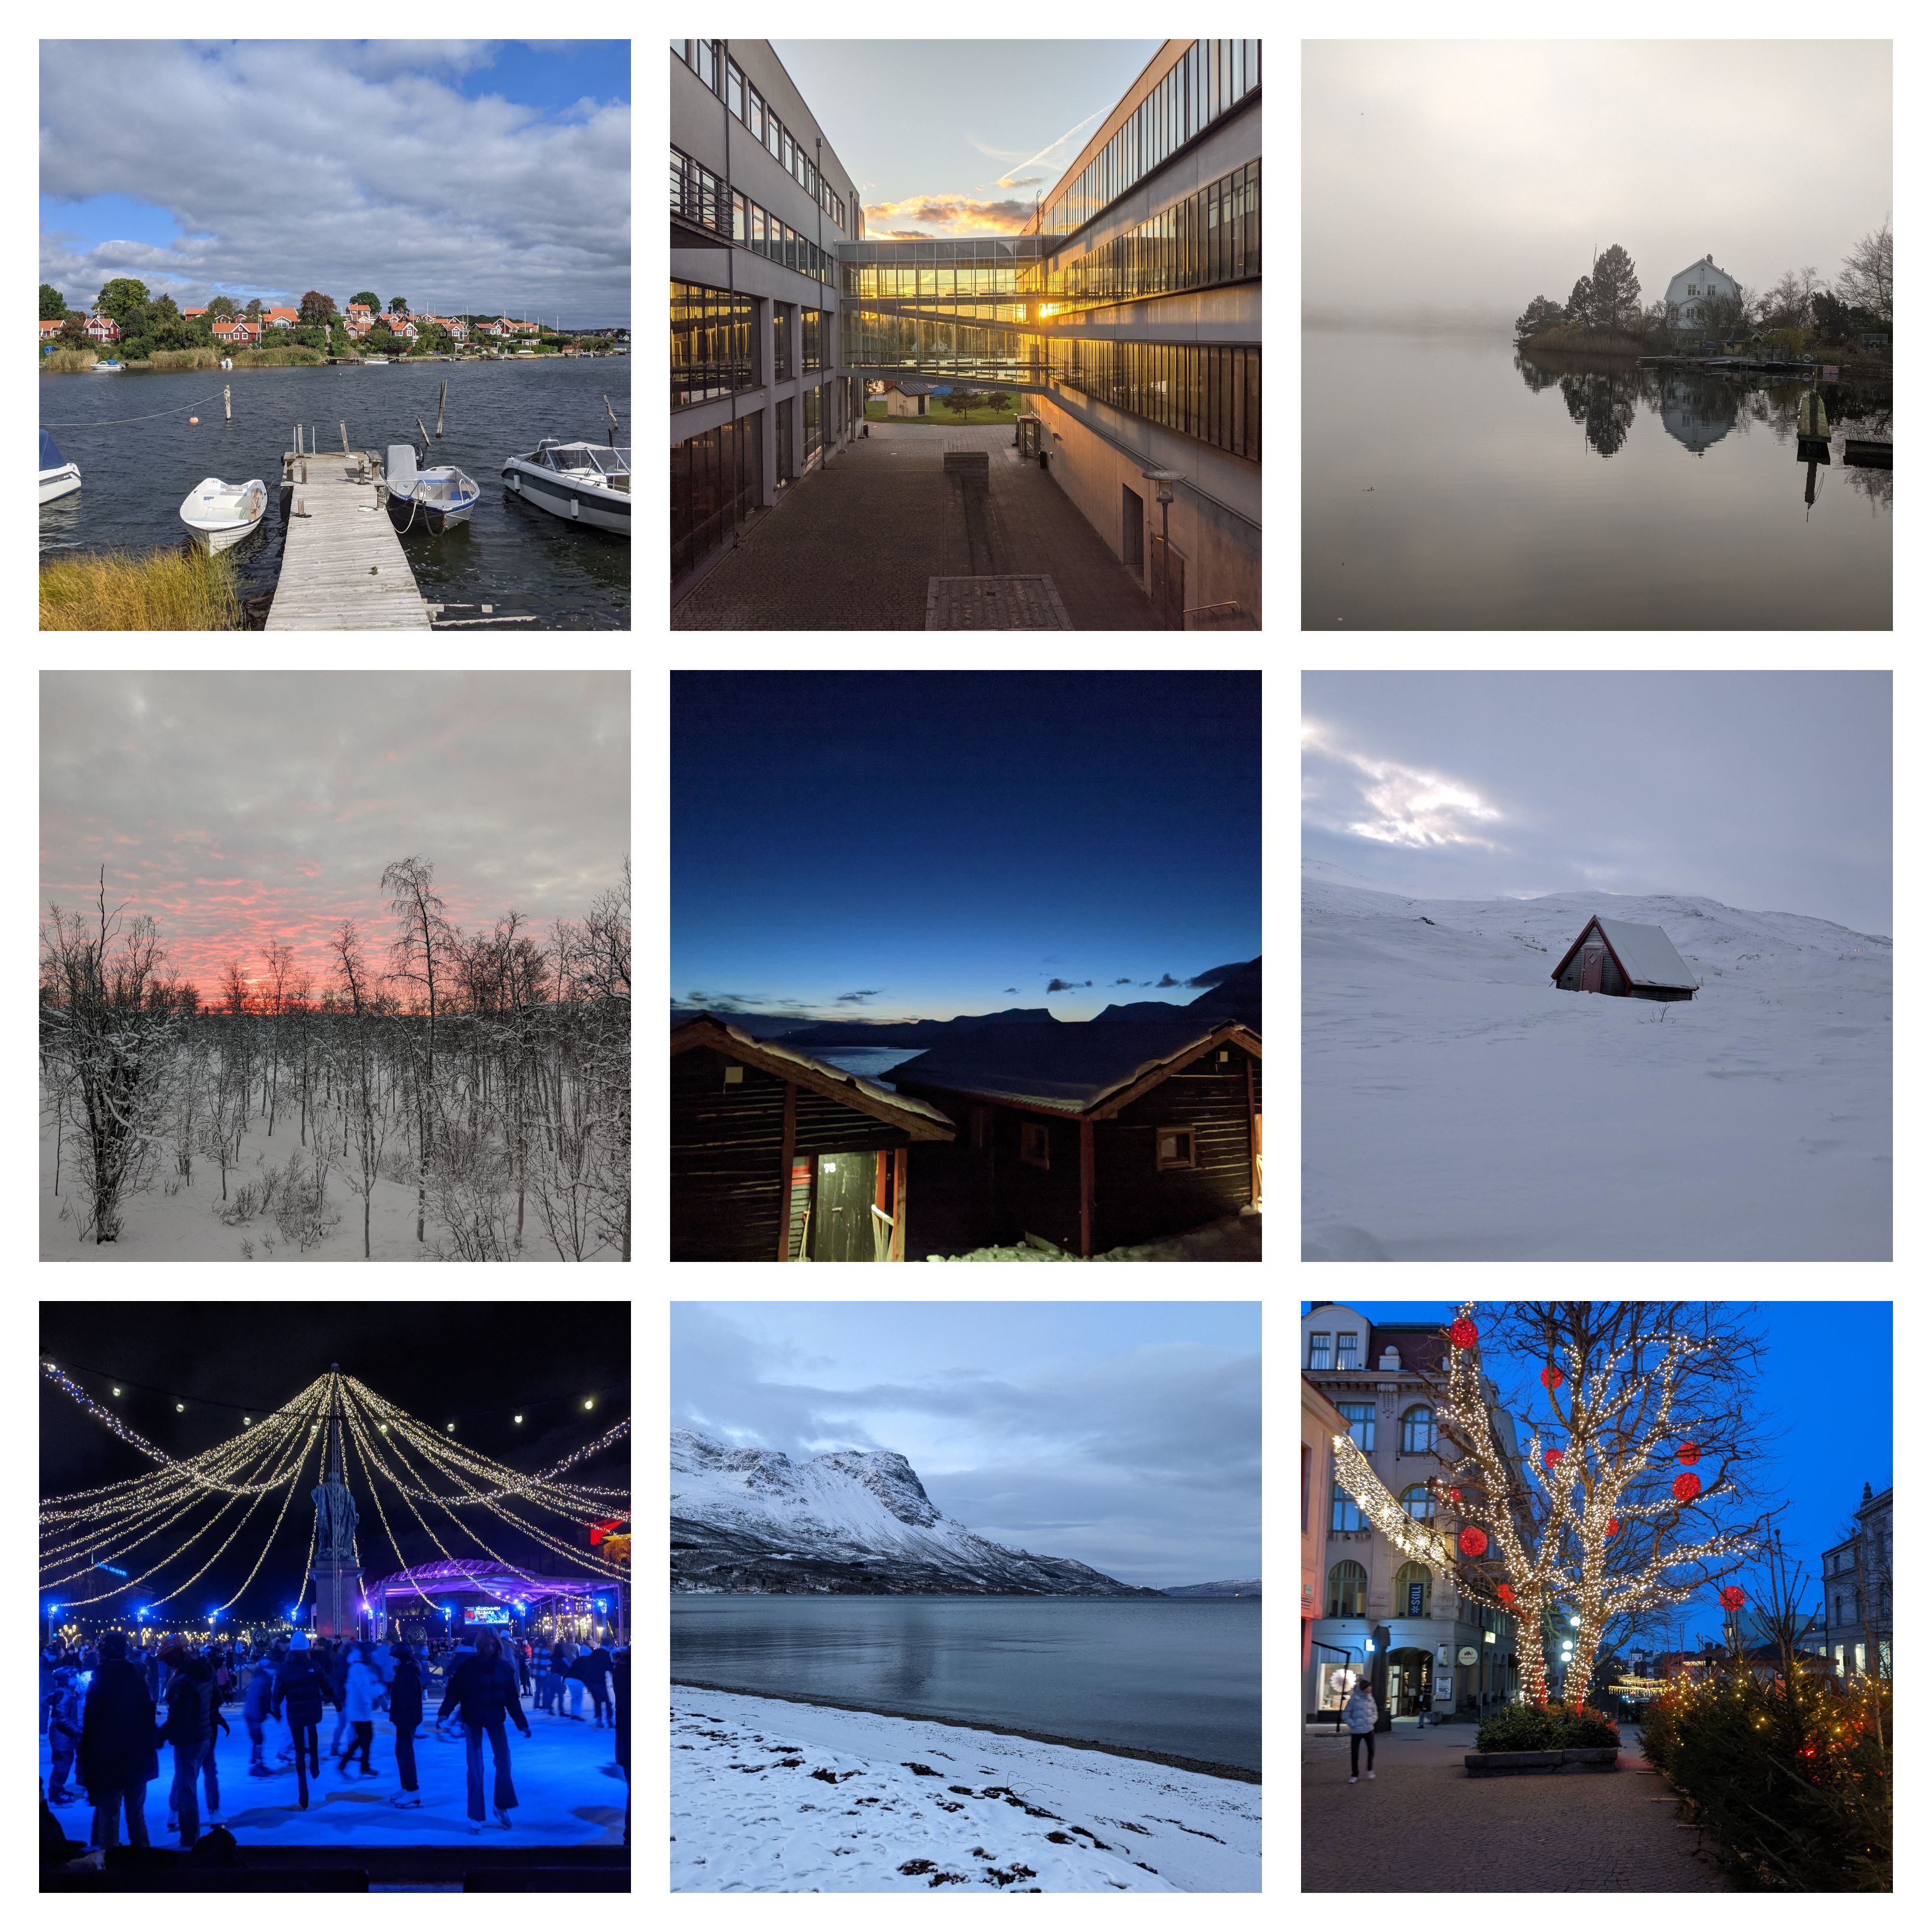 Collage of images from Sweden